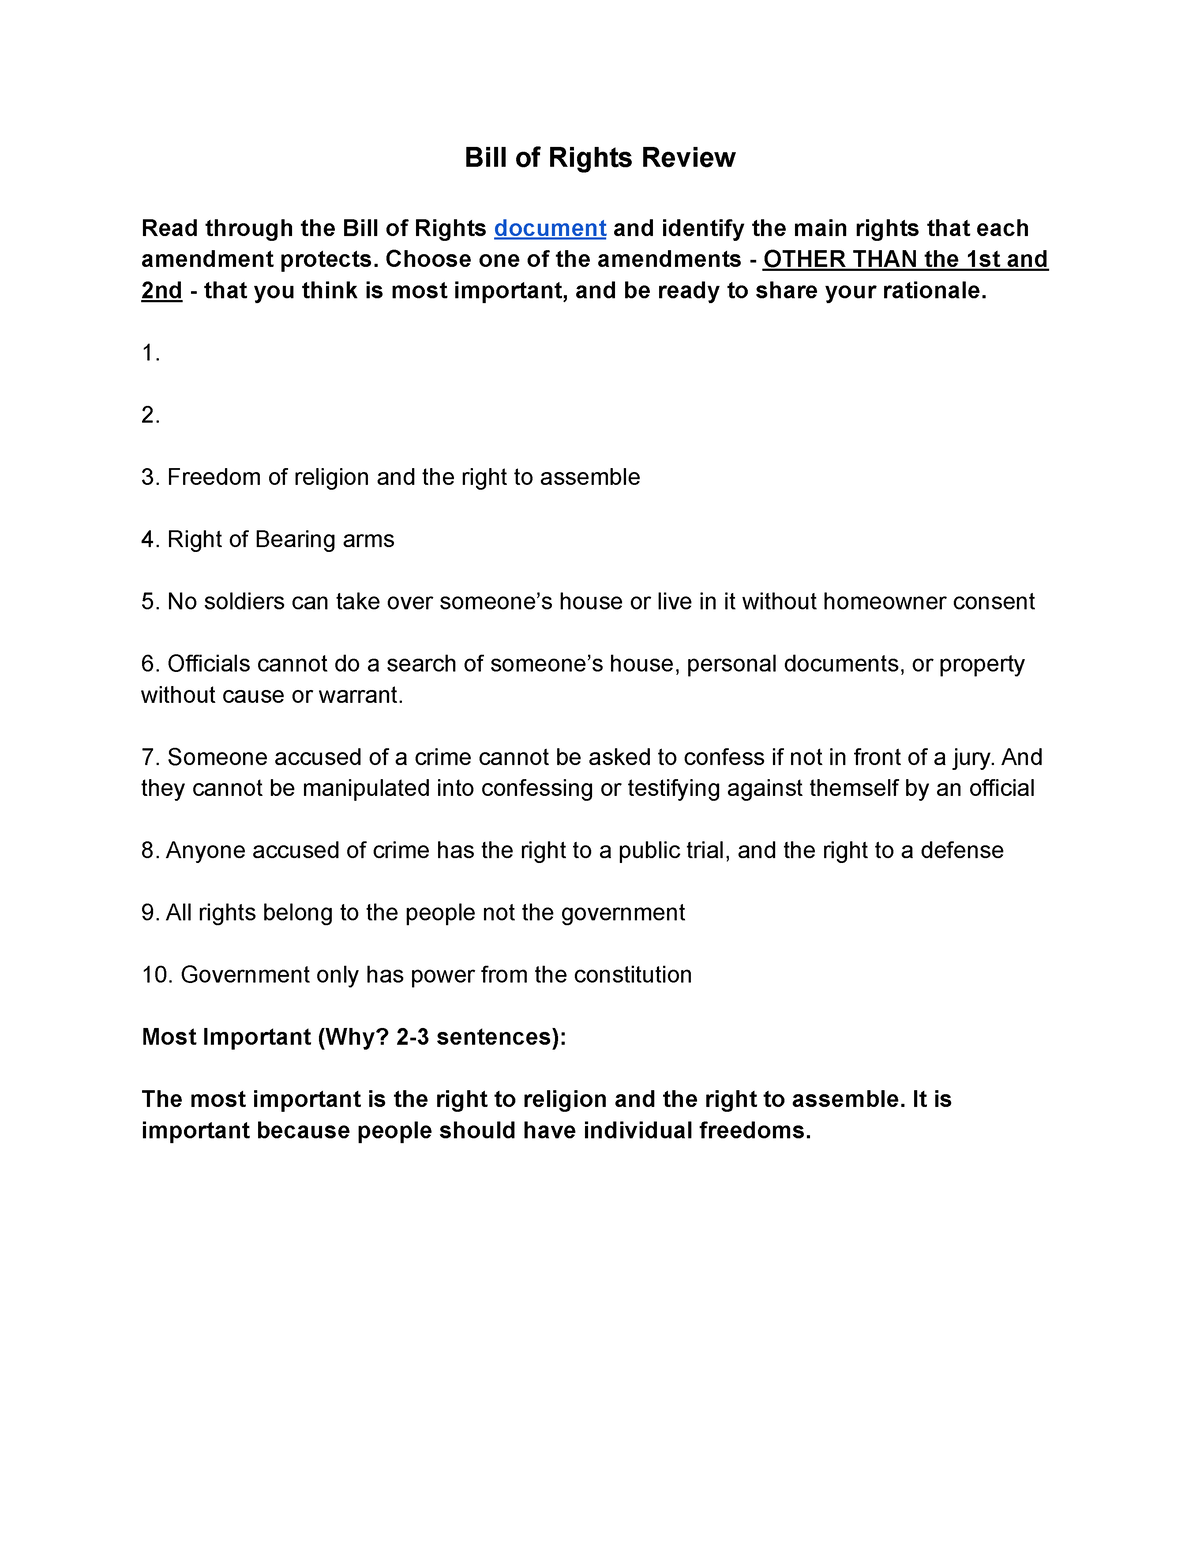 copy-of-bill-of-rights-review-bill-of-rights-review-read-through-the-bill-of-rights-document